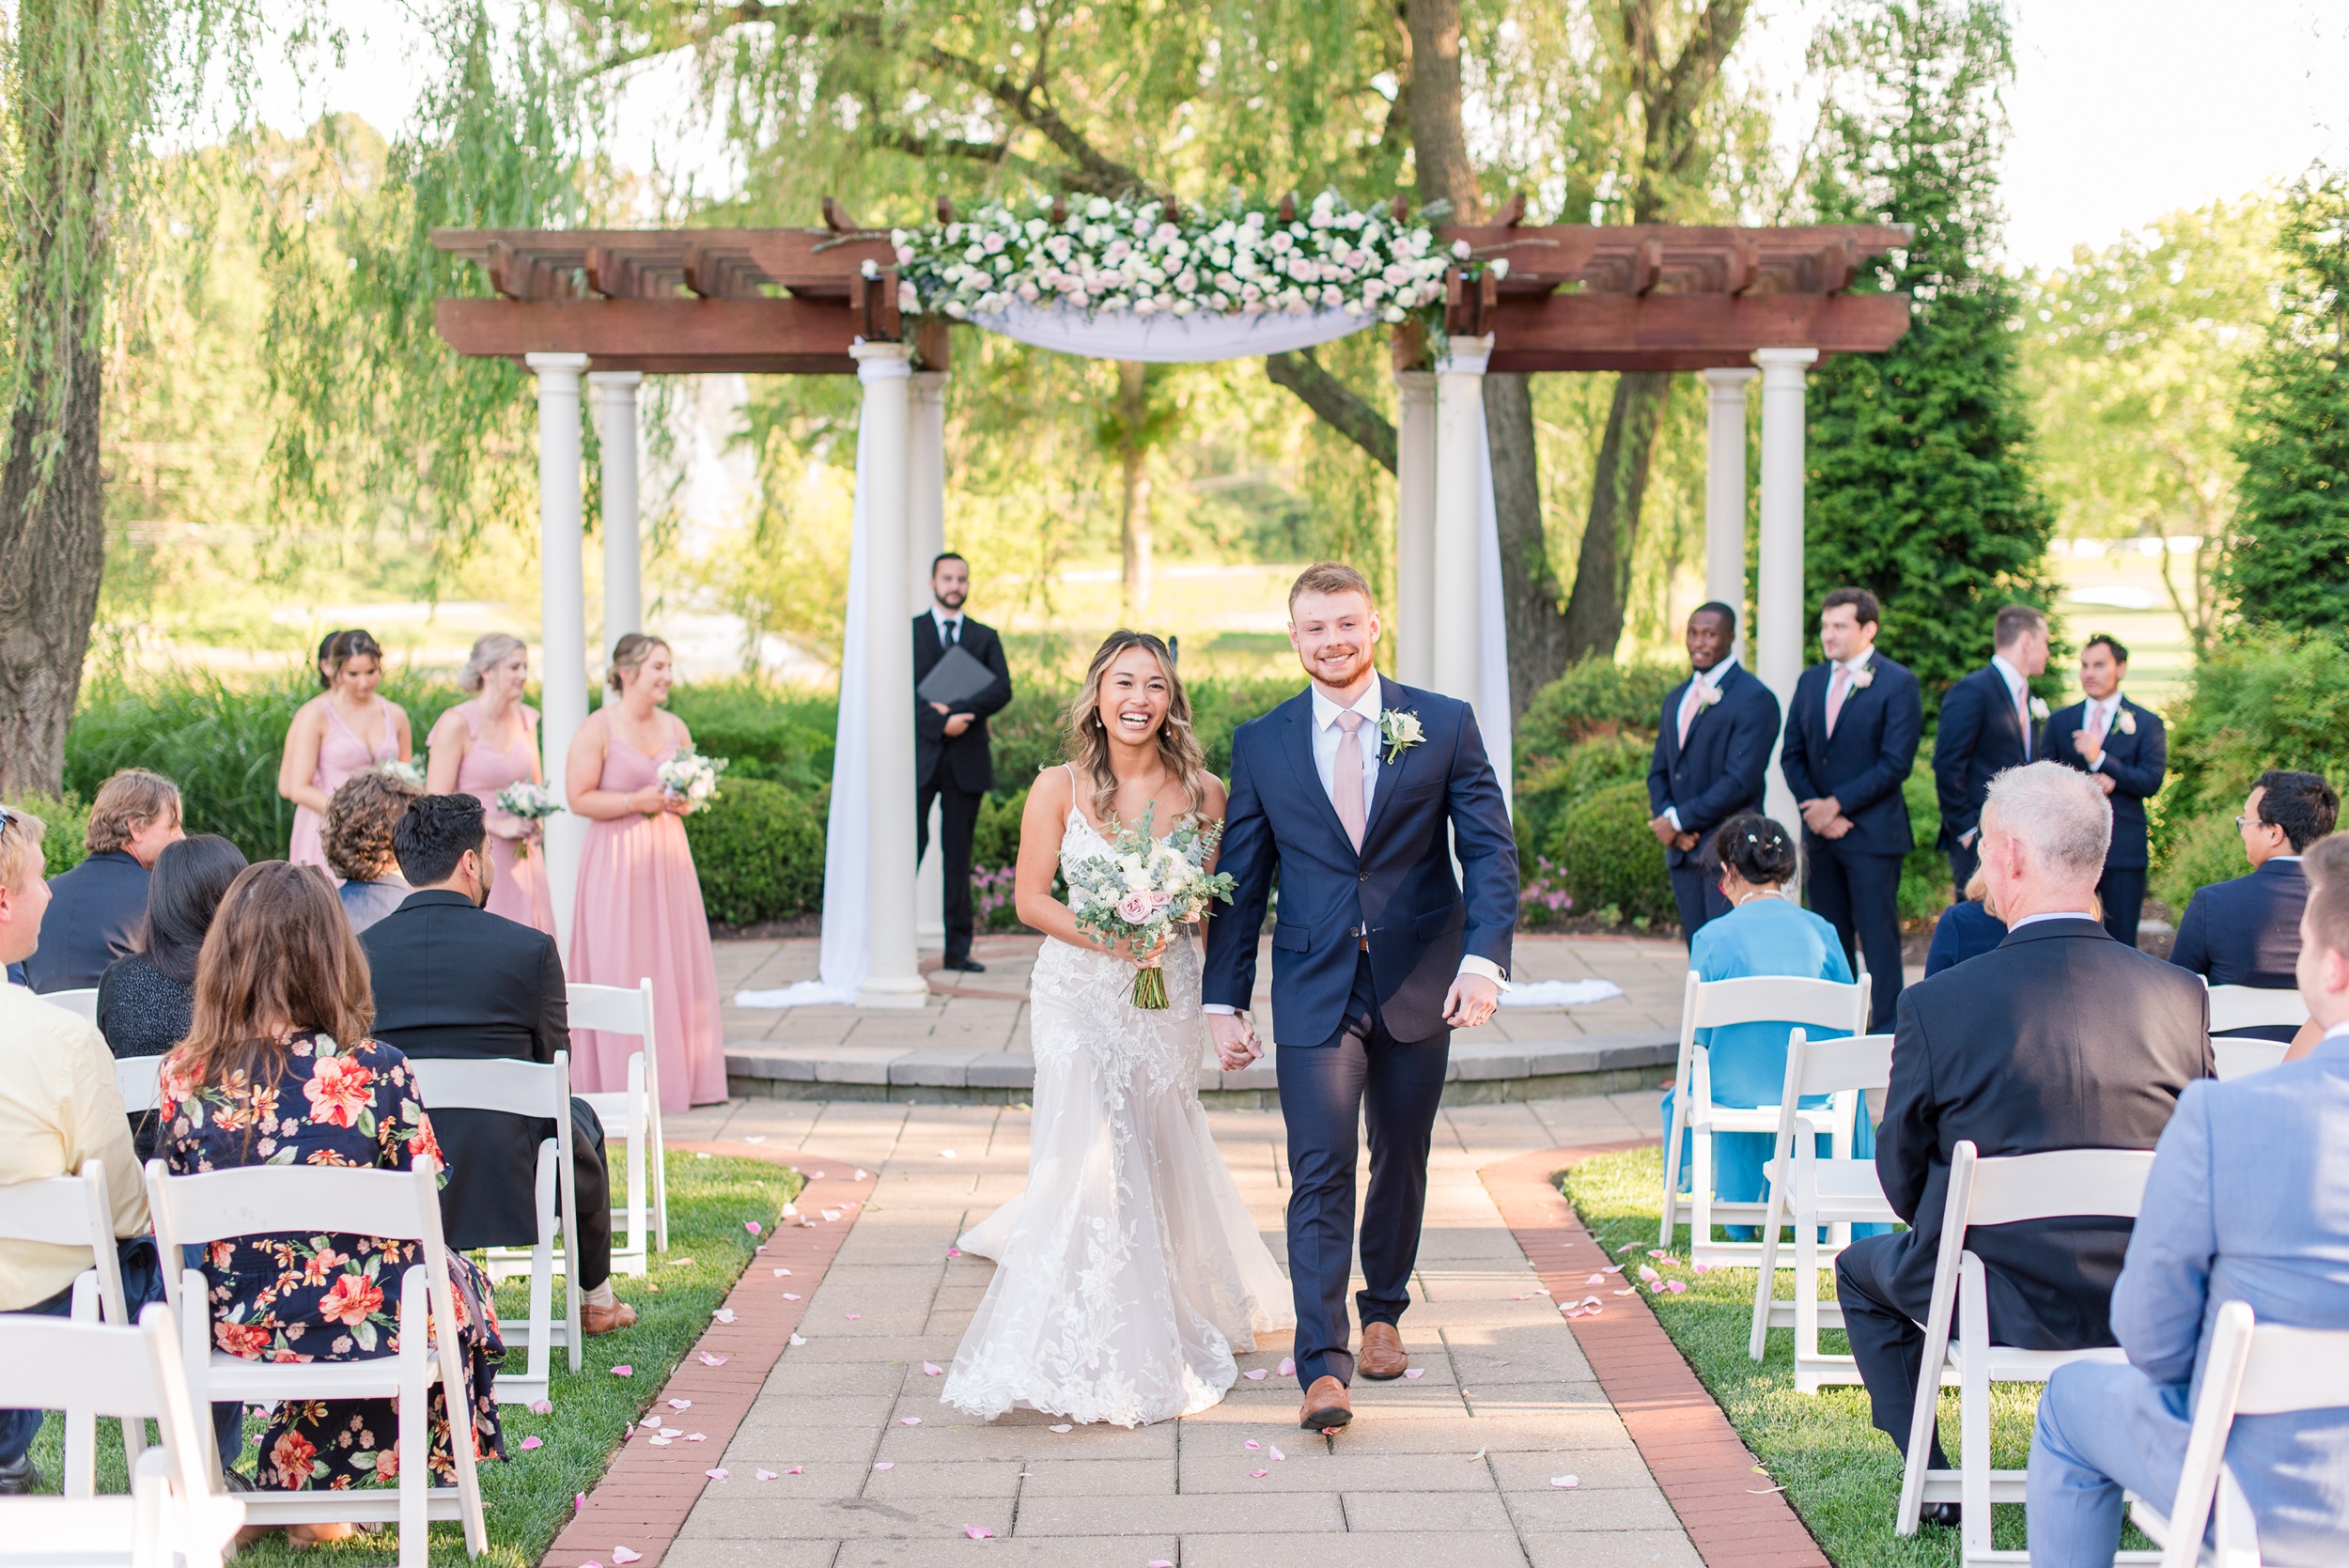 Newlyweds happily walk up the aisle holding hands to end their outdoor Turf Valley Resort Wedding under a pergola